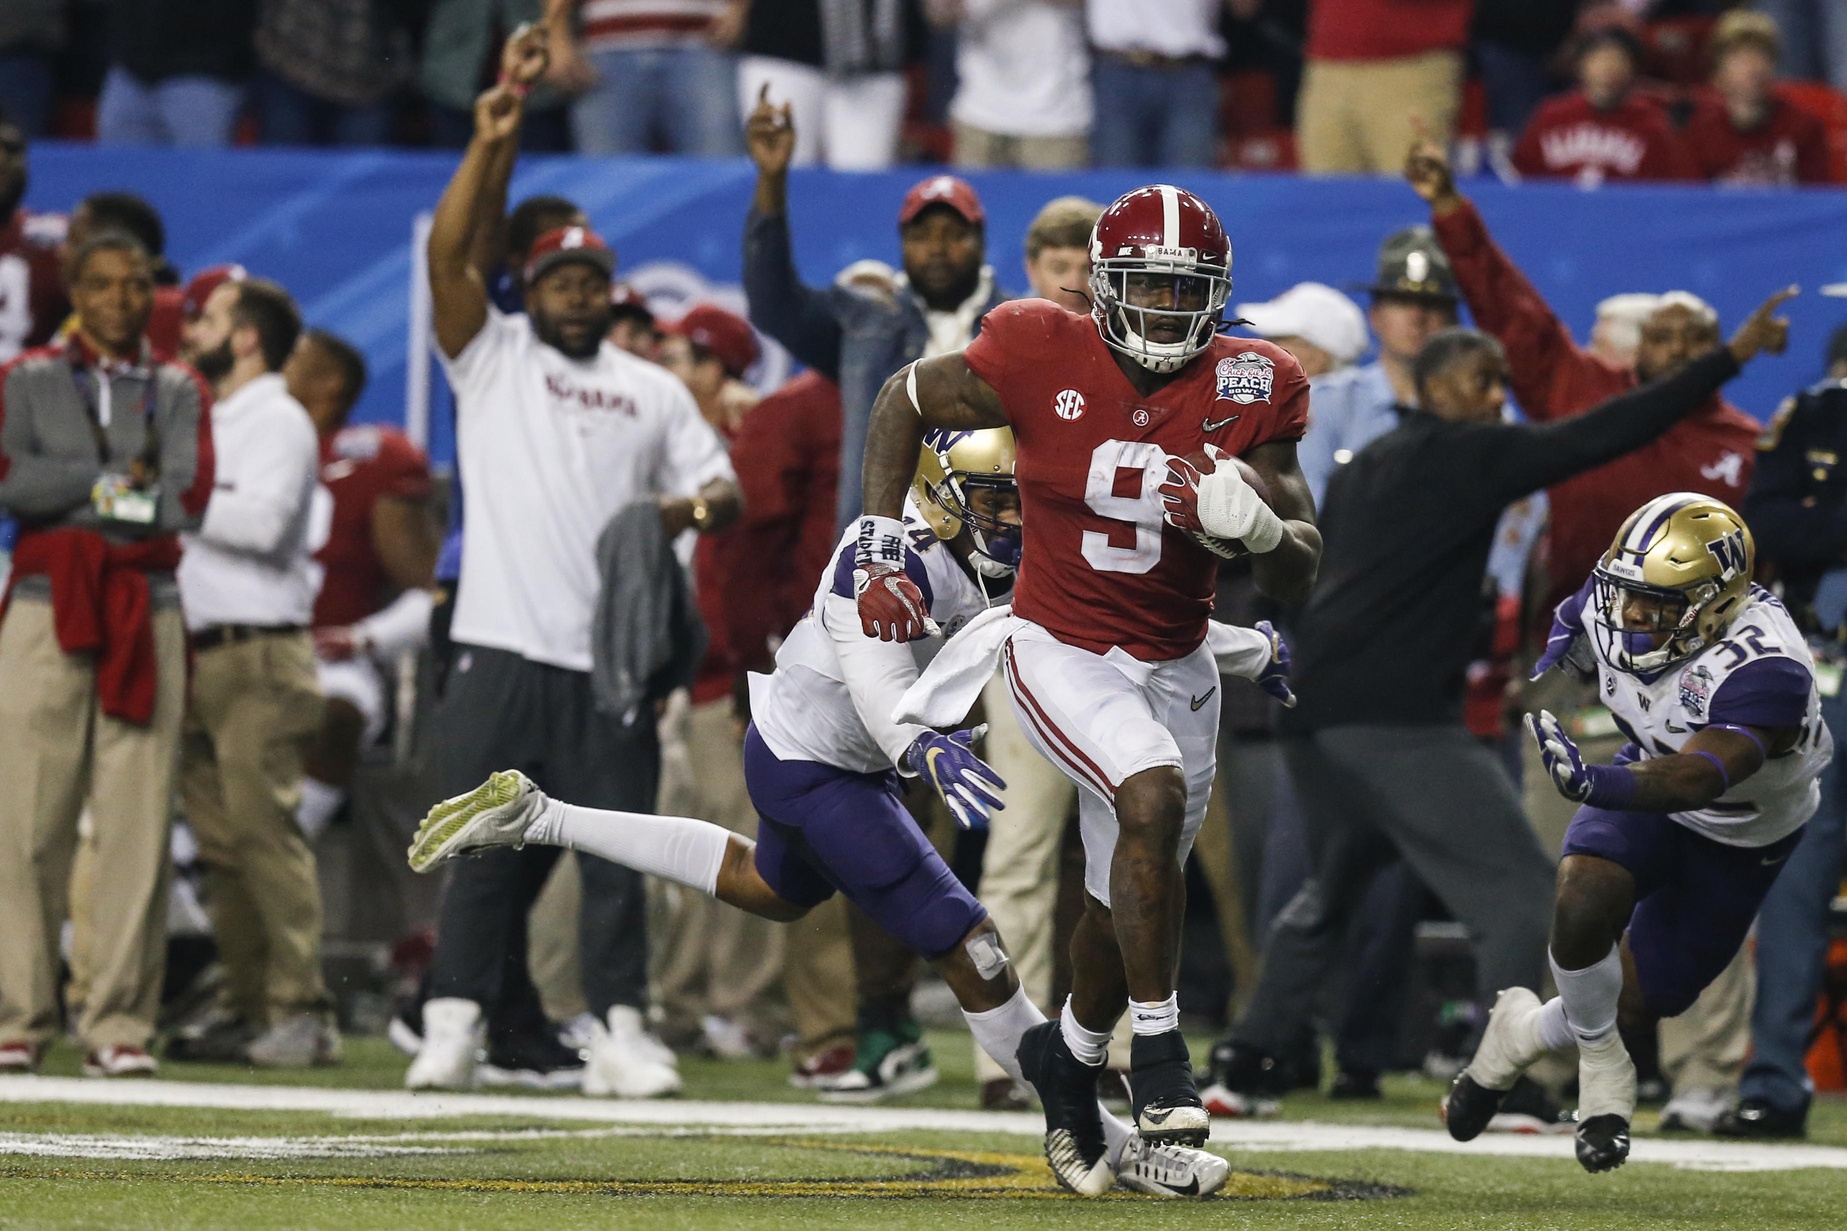 Dec 31, 2016; Atlanta, GA, USA; Alabama Crimson Tide running back Bo Scarbrough (9) runs the ball for a touchdown during the fourth quarter in the 2016 CFP Semifinal against the Washington Huskies at the Georgia Dome. Mandatory Credit: Jason Getz-USA TODAY Sports